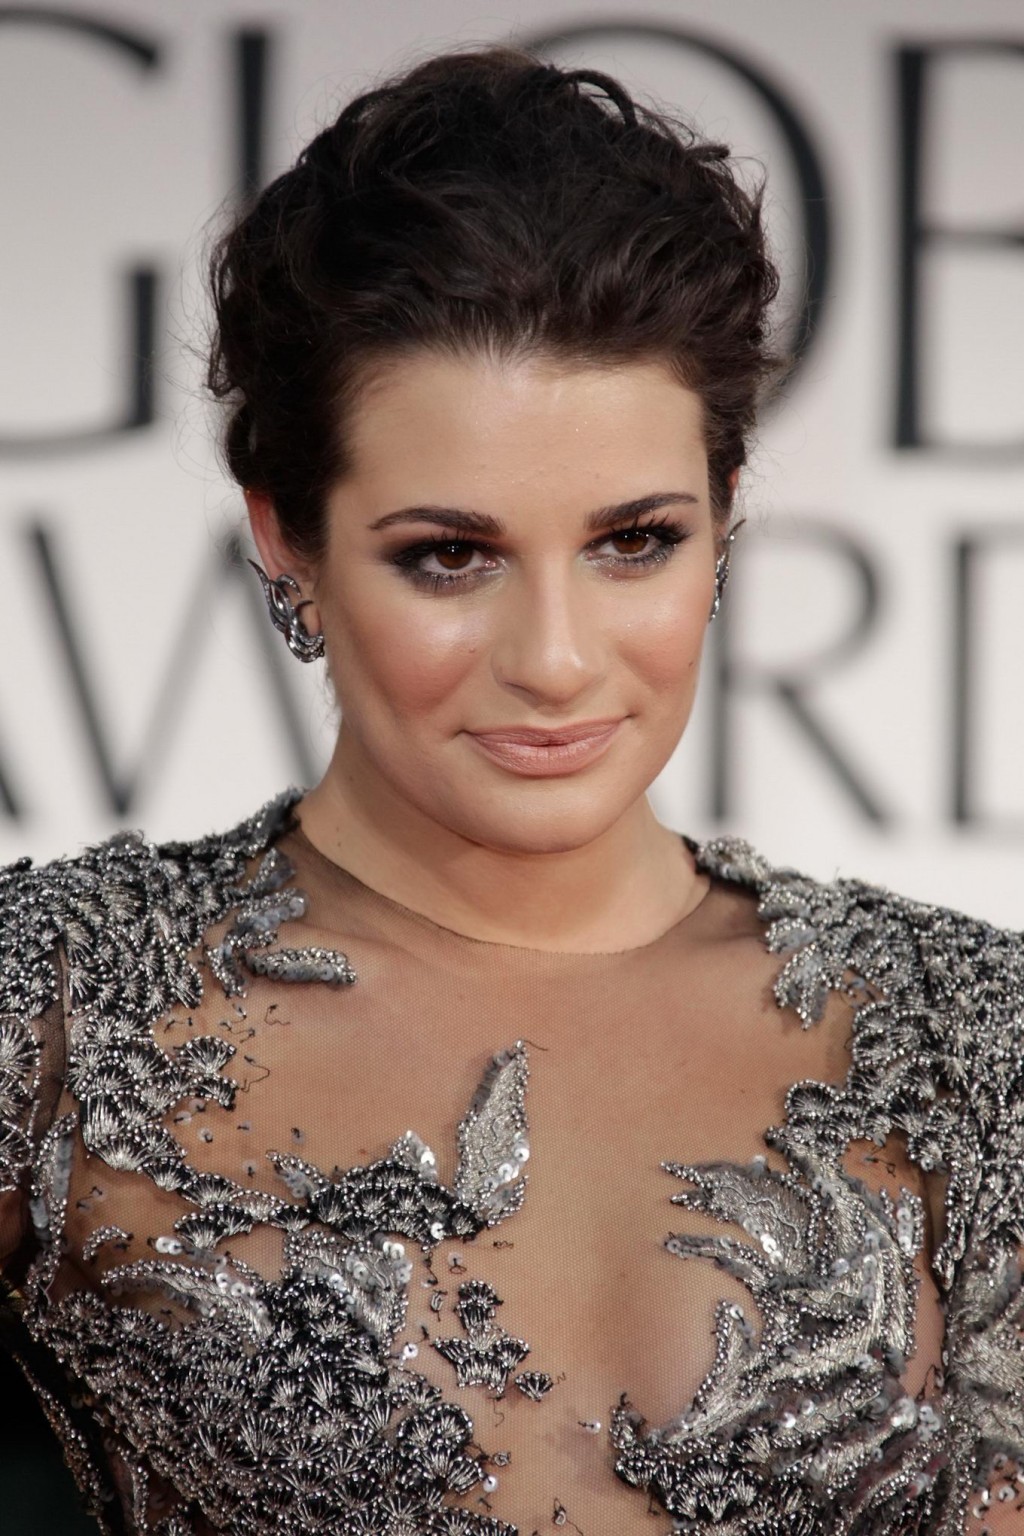 Lea Michele wearing see through lace dress at the Golden Globes 2012 #75276292